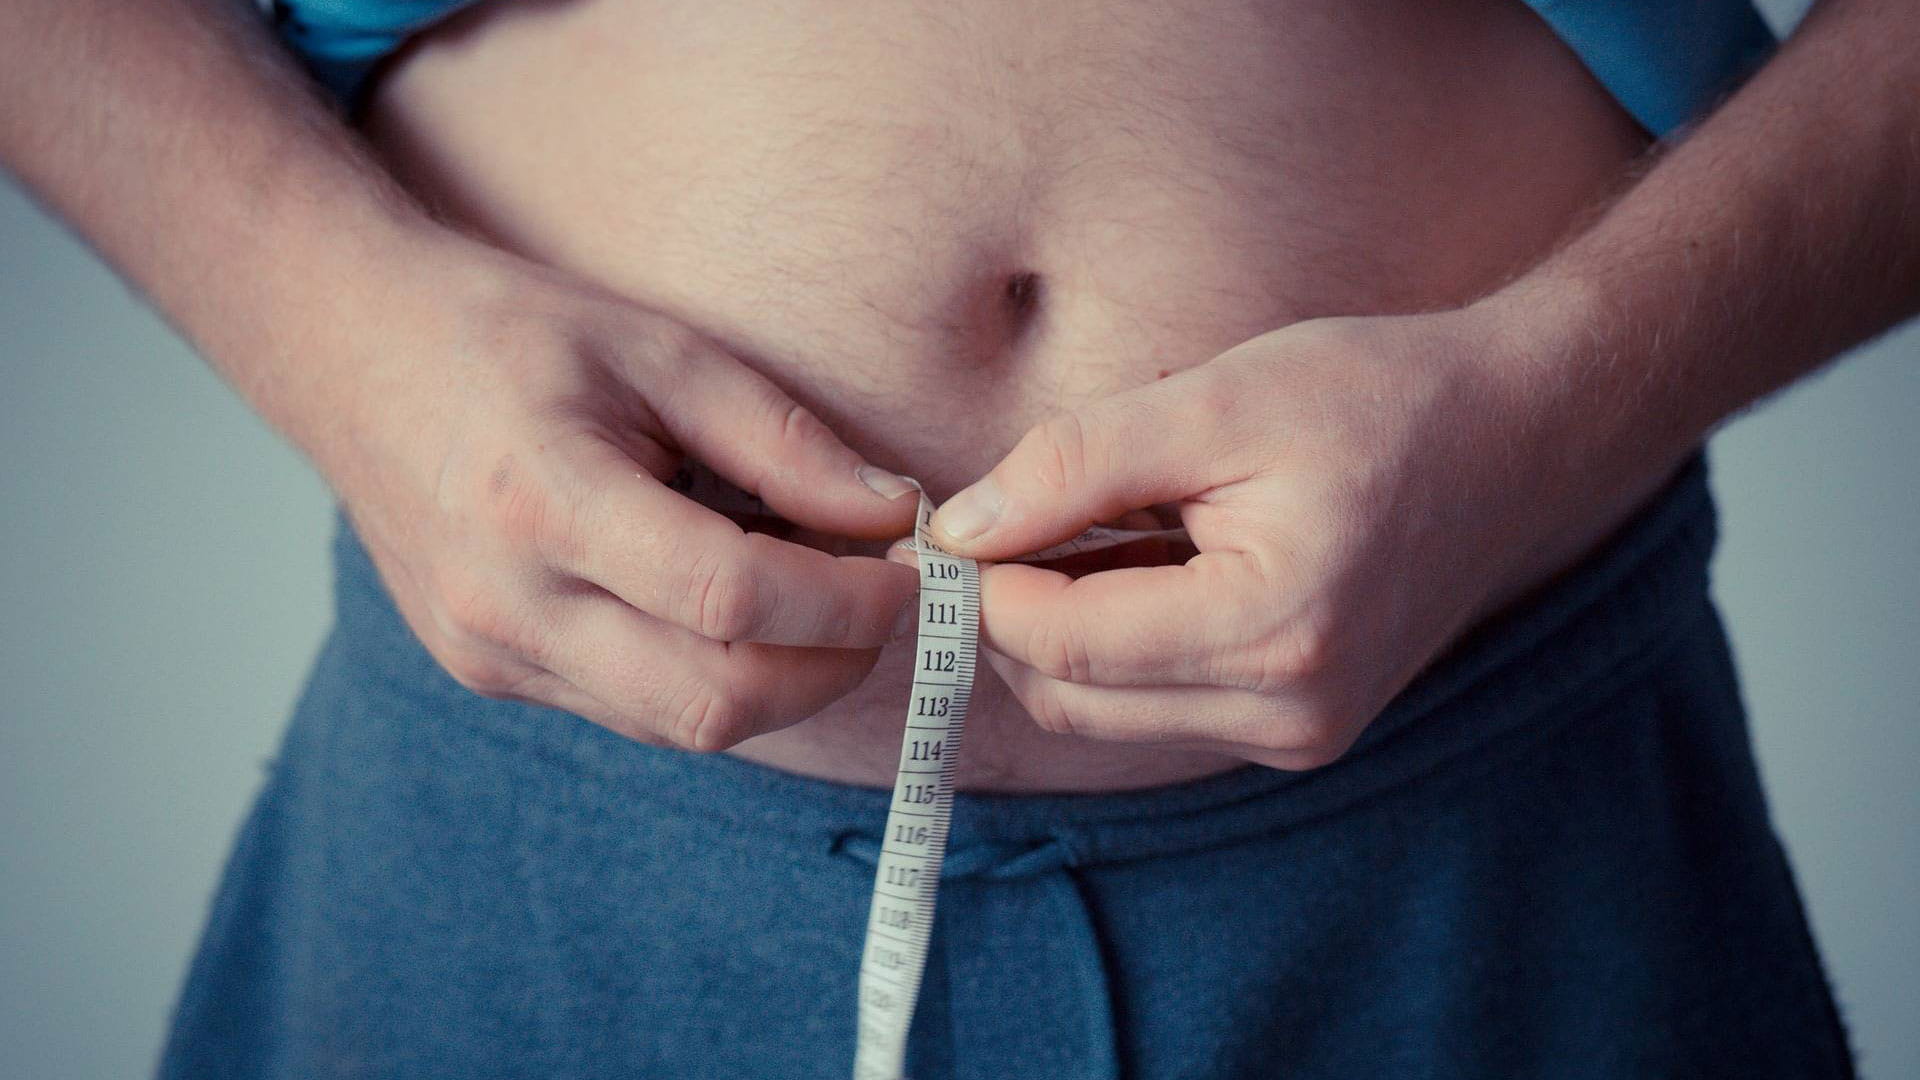 Hypnotic Virtual Gastric Band Weight Loss Program Now Offered in Small Group Setting